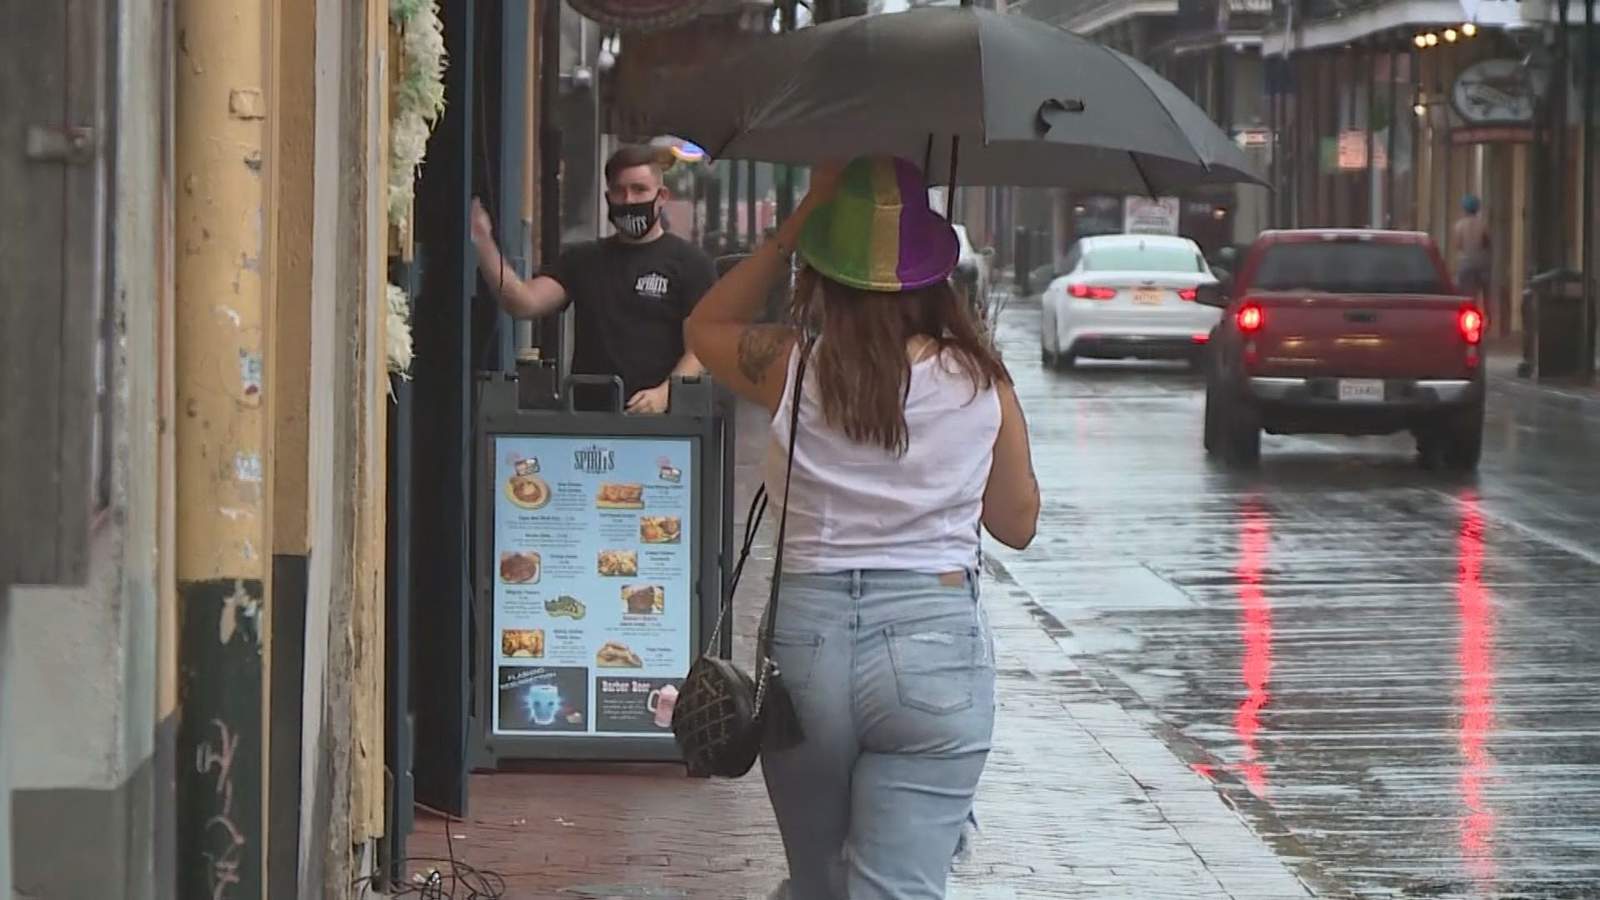 Reporters Notebook: New Orleans residents braces for Tropical Storm Cristobal amid pandemic, protests